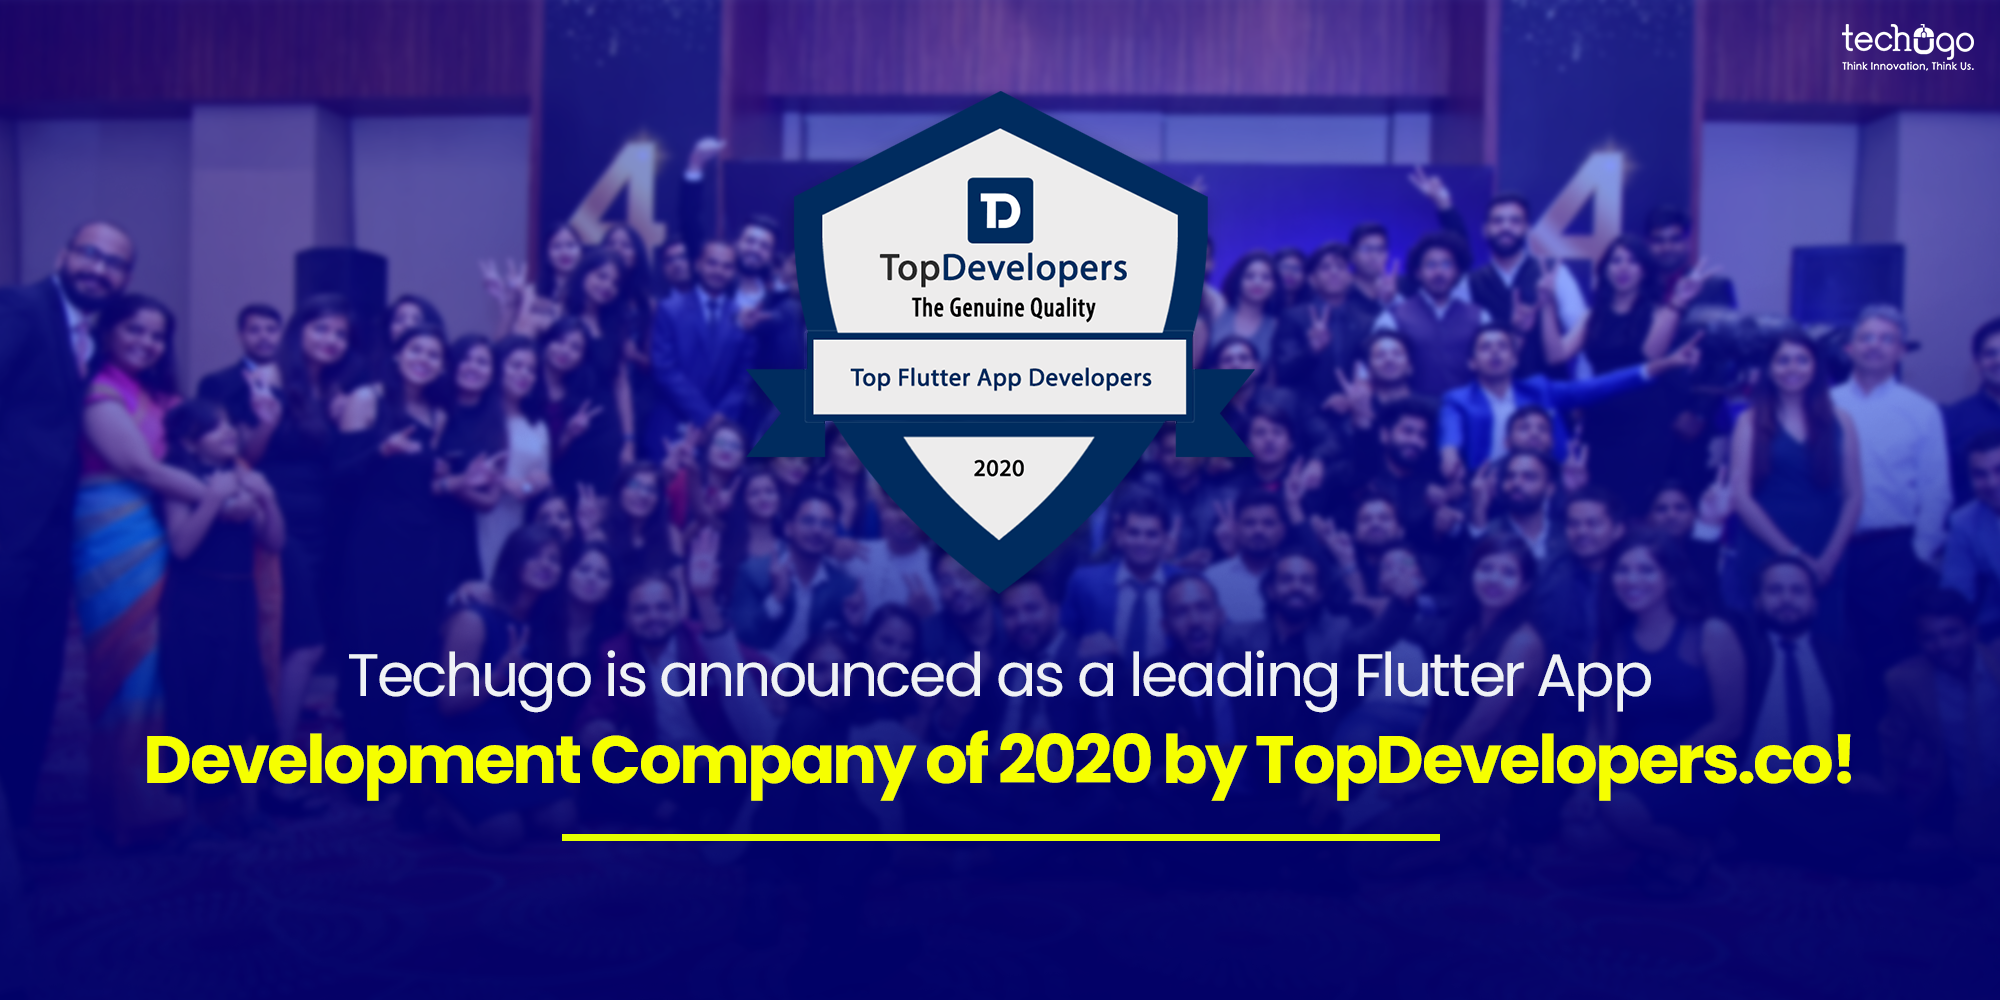 TECHUGO IS ANNOUNCED AS A LEADING FLUTTER APP DEVELOPMENT COMPANY OF 2020 BY TOPDEVELOPERS.CO!